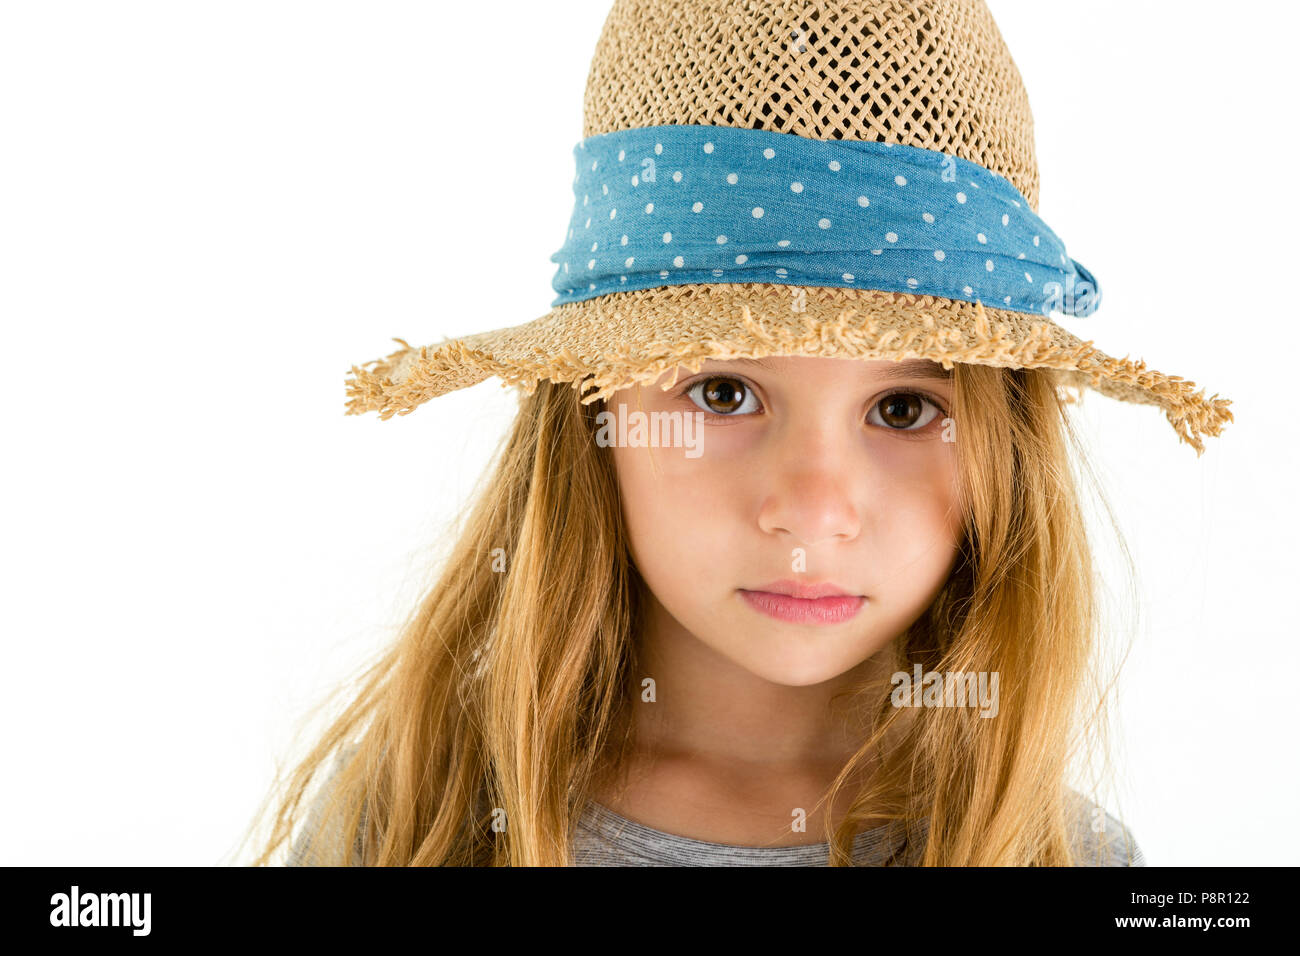 Adorable pretty little girl with big soulful eyes looking out from under the wide brim of a straw hat at the camera with a solemn expression, isolated Stock Photo